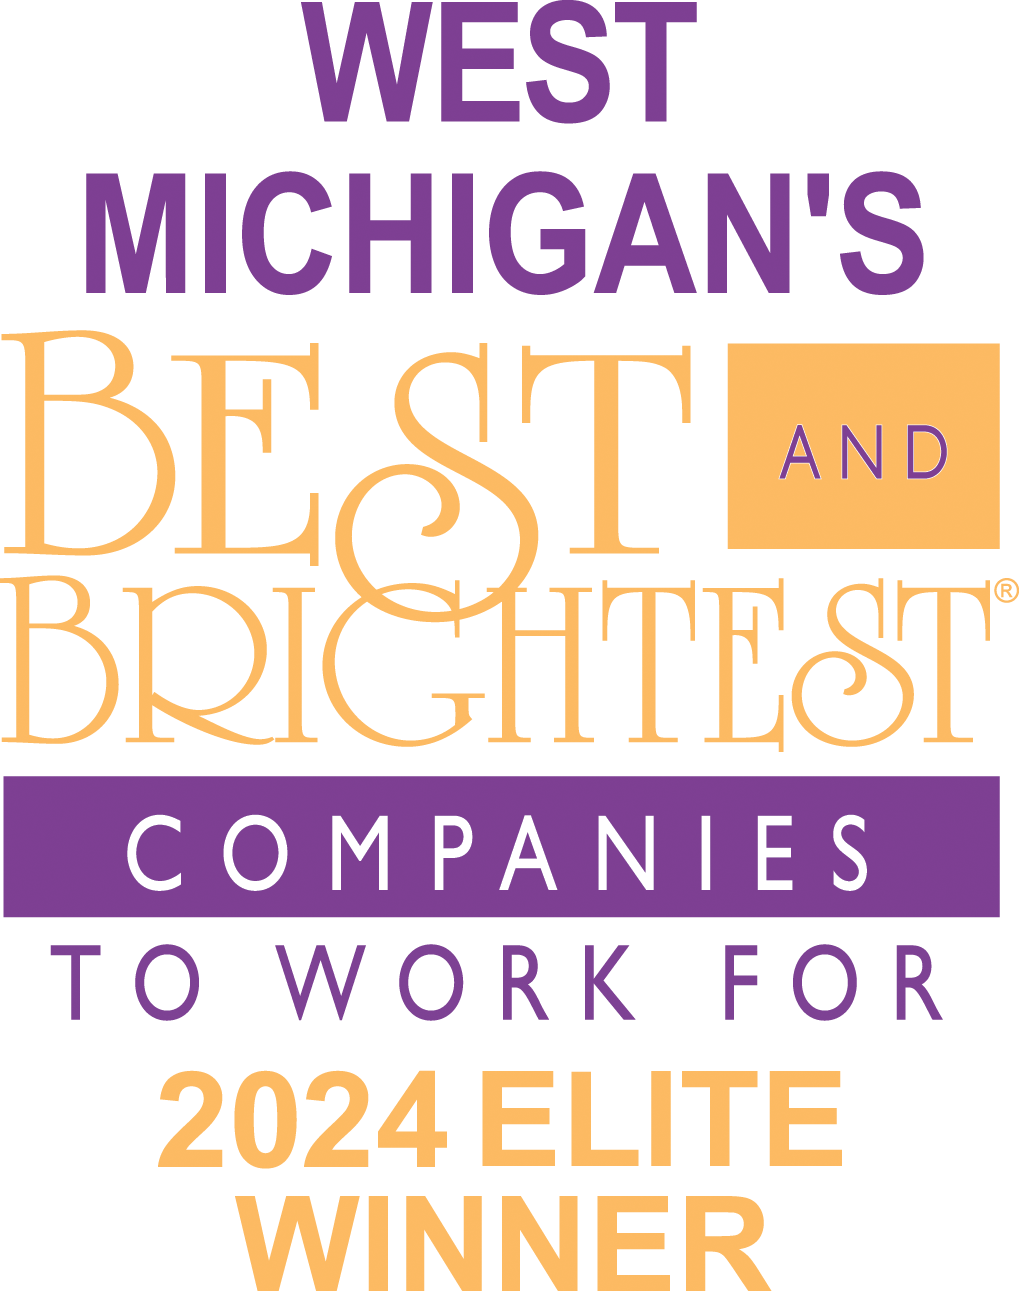 West Michigan's Best and Brightest Companies to Work For 2024 Elite Winner | logo